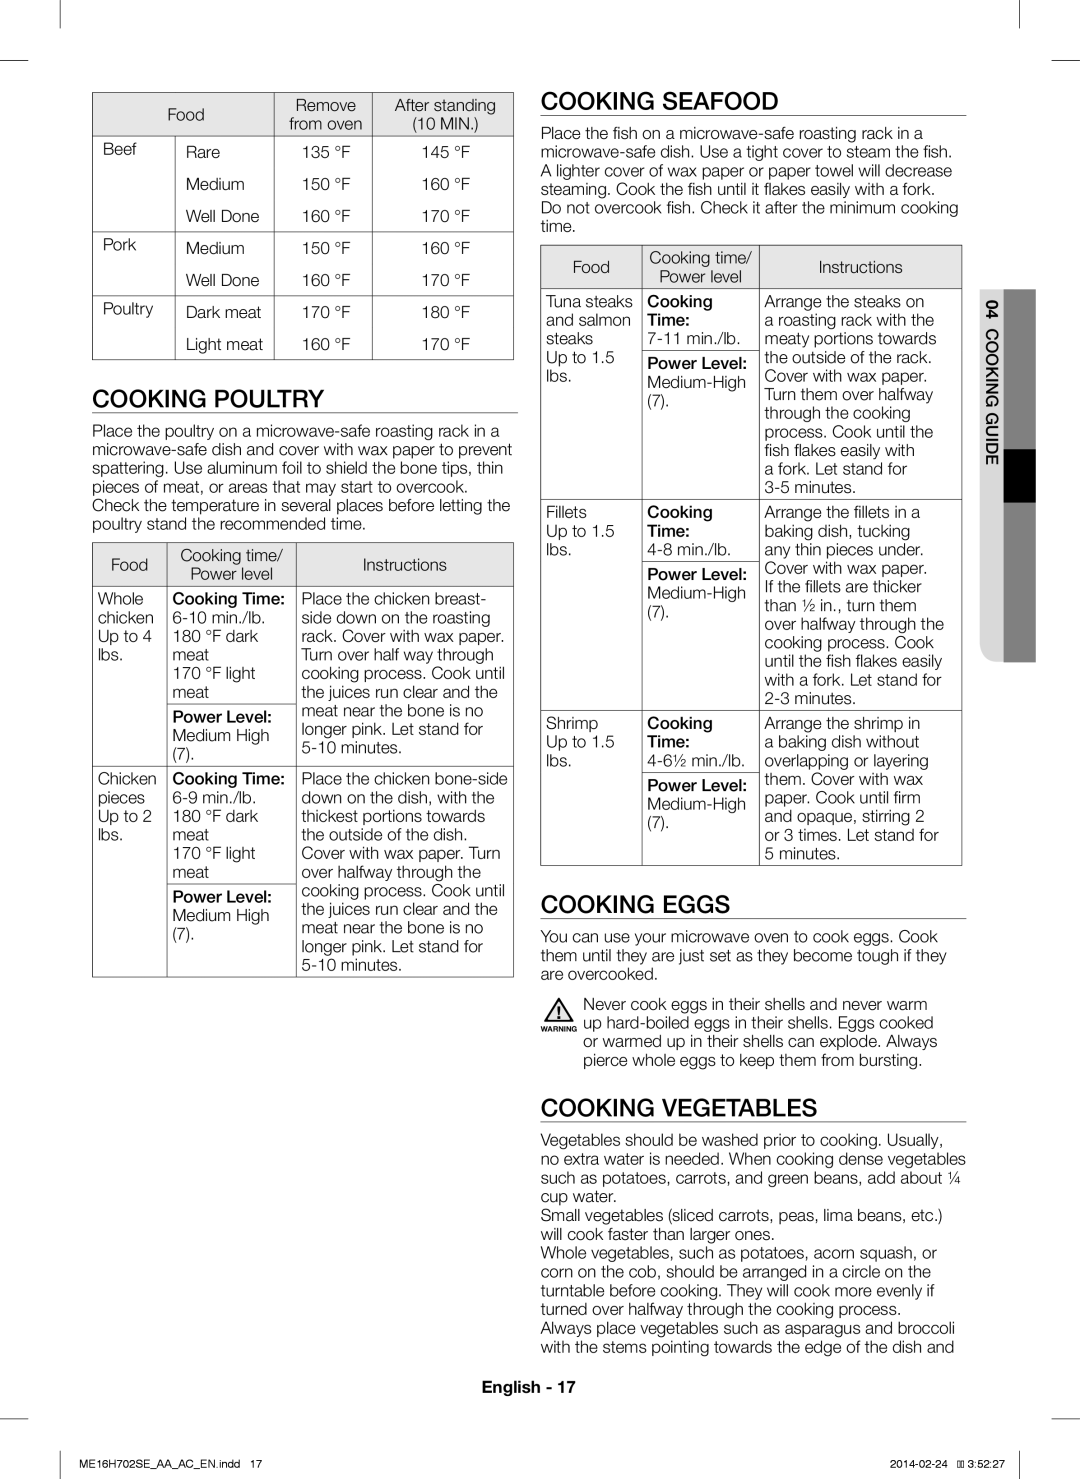 Samsung ME16H702SE user manual Cooking Poultry, Cooking Seafood, Cooking Eggs, Cooking Vegetables, English 